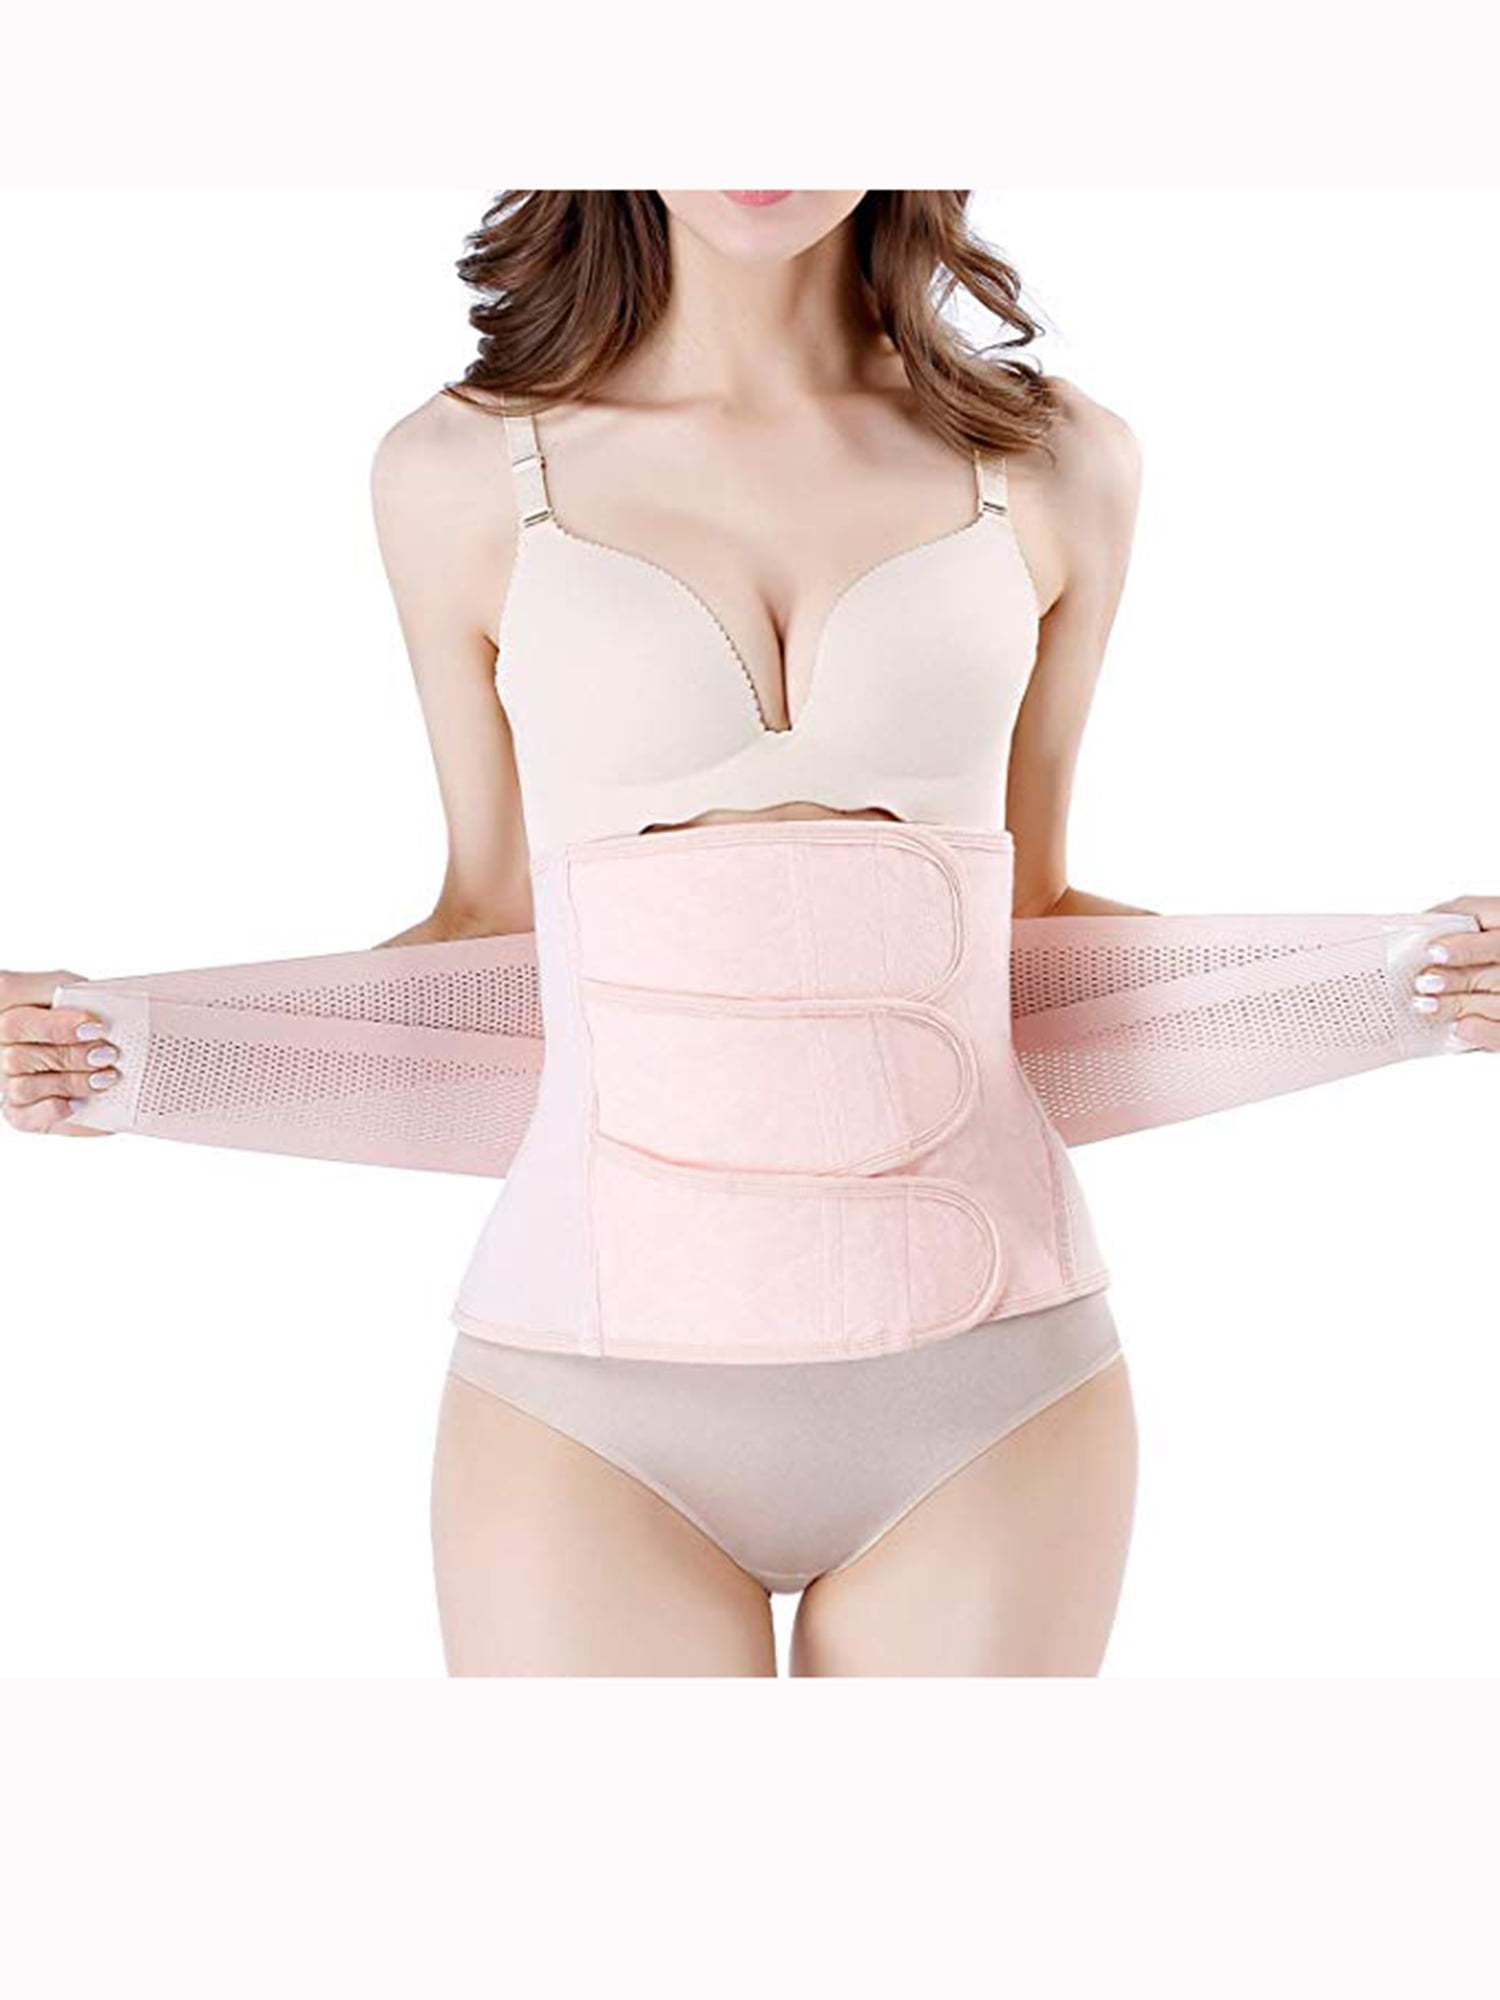 Women Postpartum Belt Belly Wrap Body Shaper Support Recovery Girdle After Birth